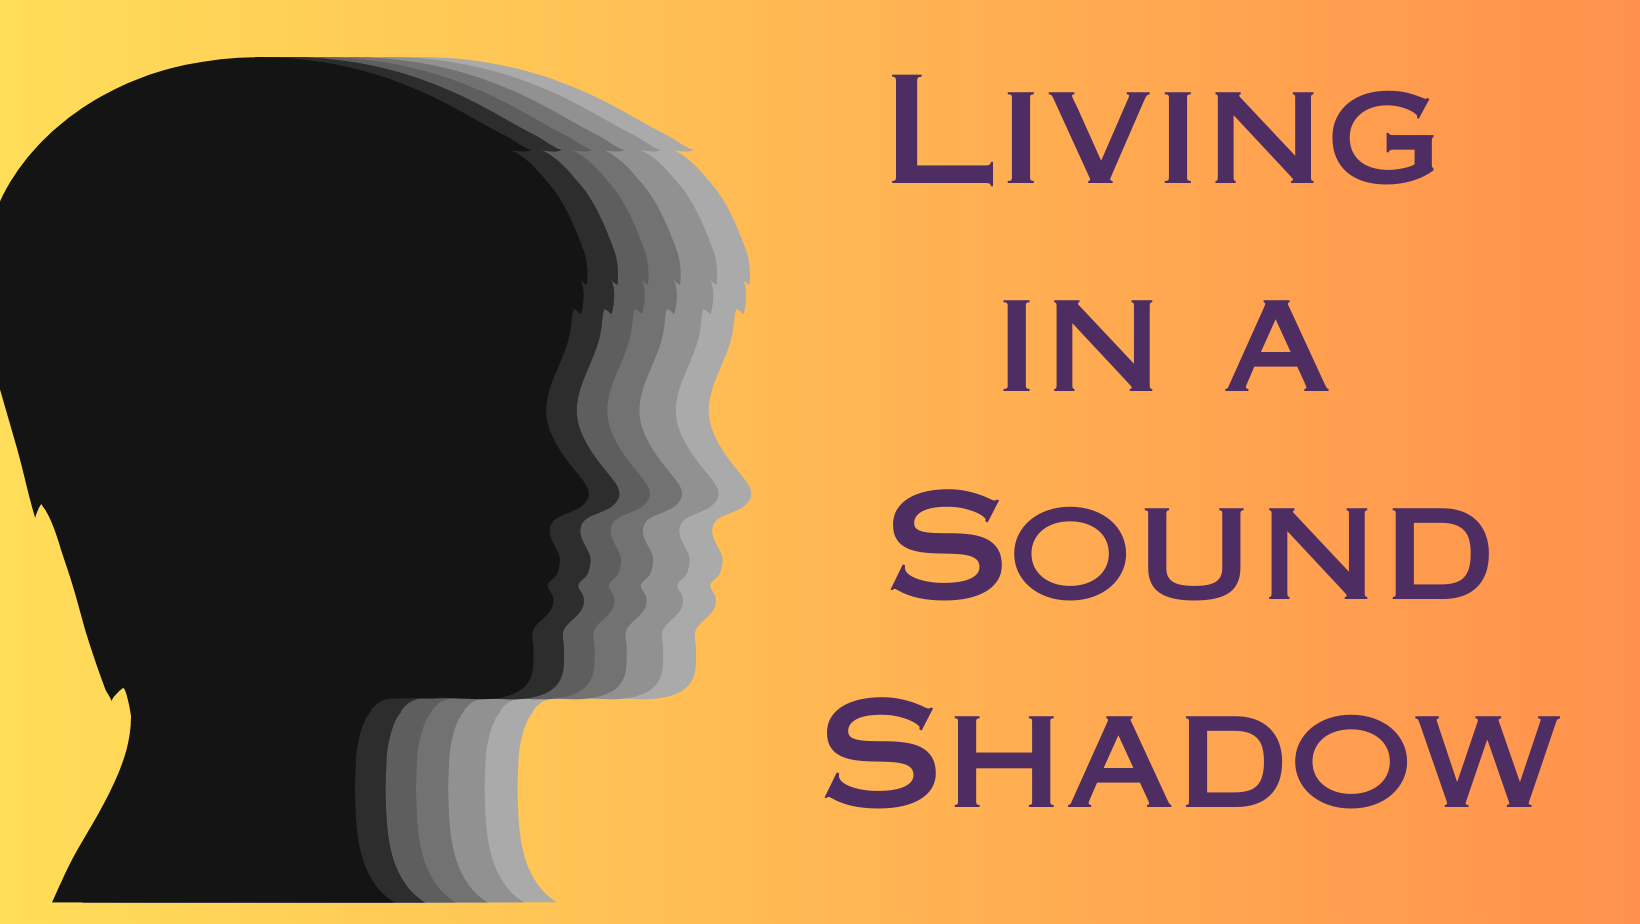 Featured image for “Living in a Sound Shadow”